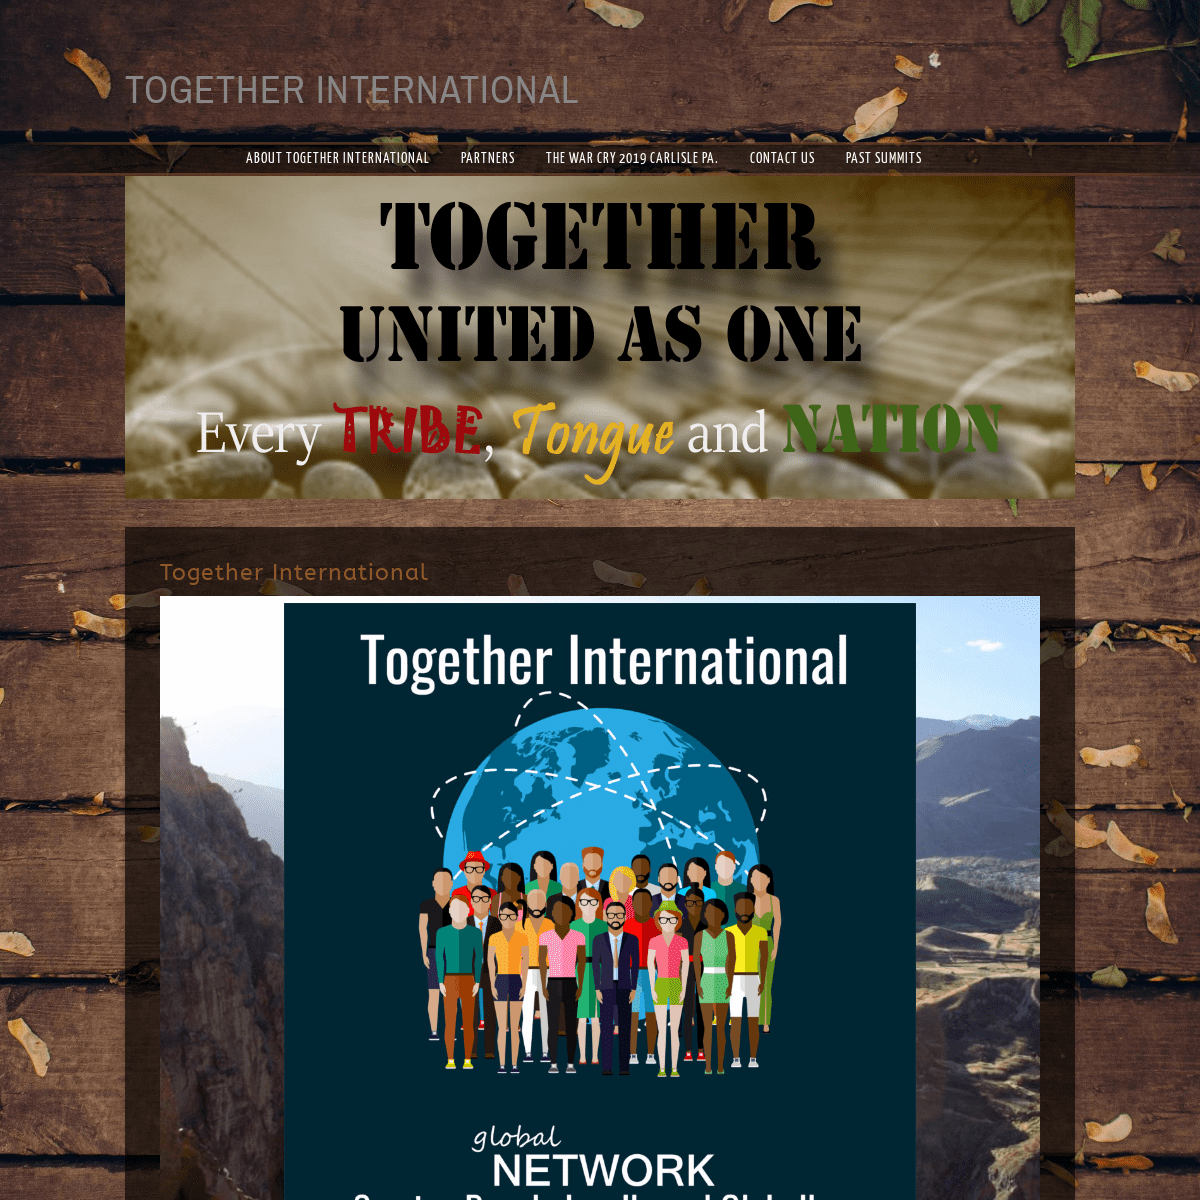 TOGETHER INTERNATIONAL - Together International is a global partnership of friends representing lives that are fully given to th